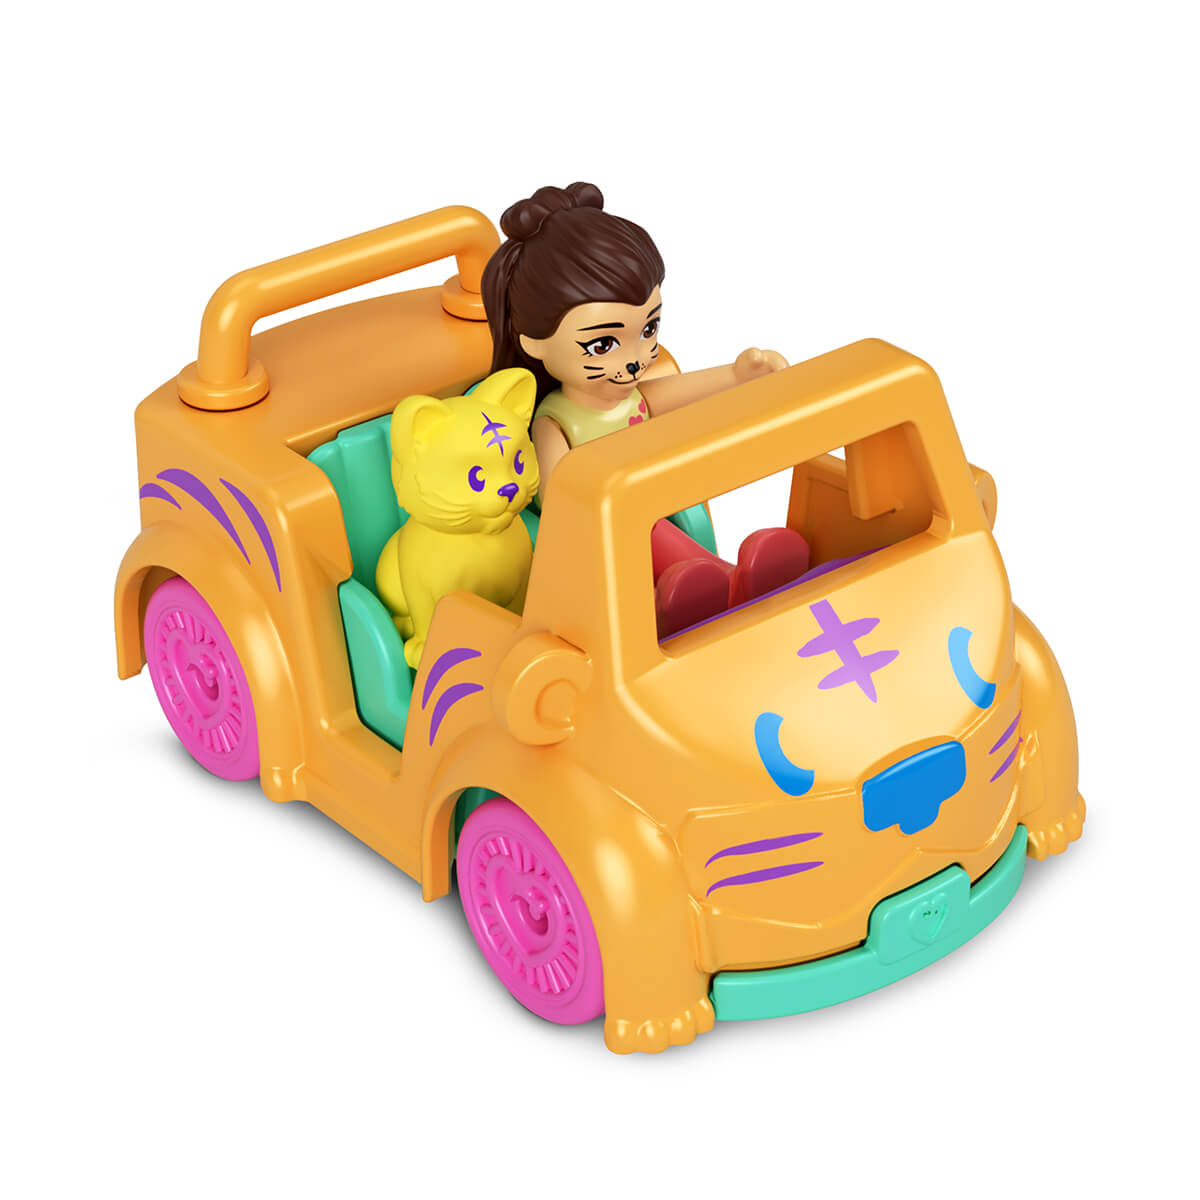 Polly Pocket and tiger riding in convertible